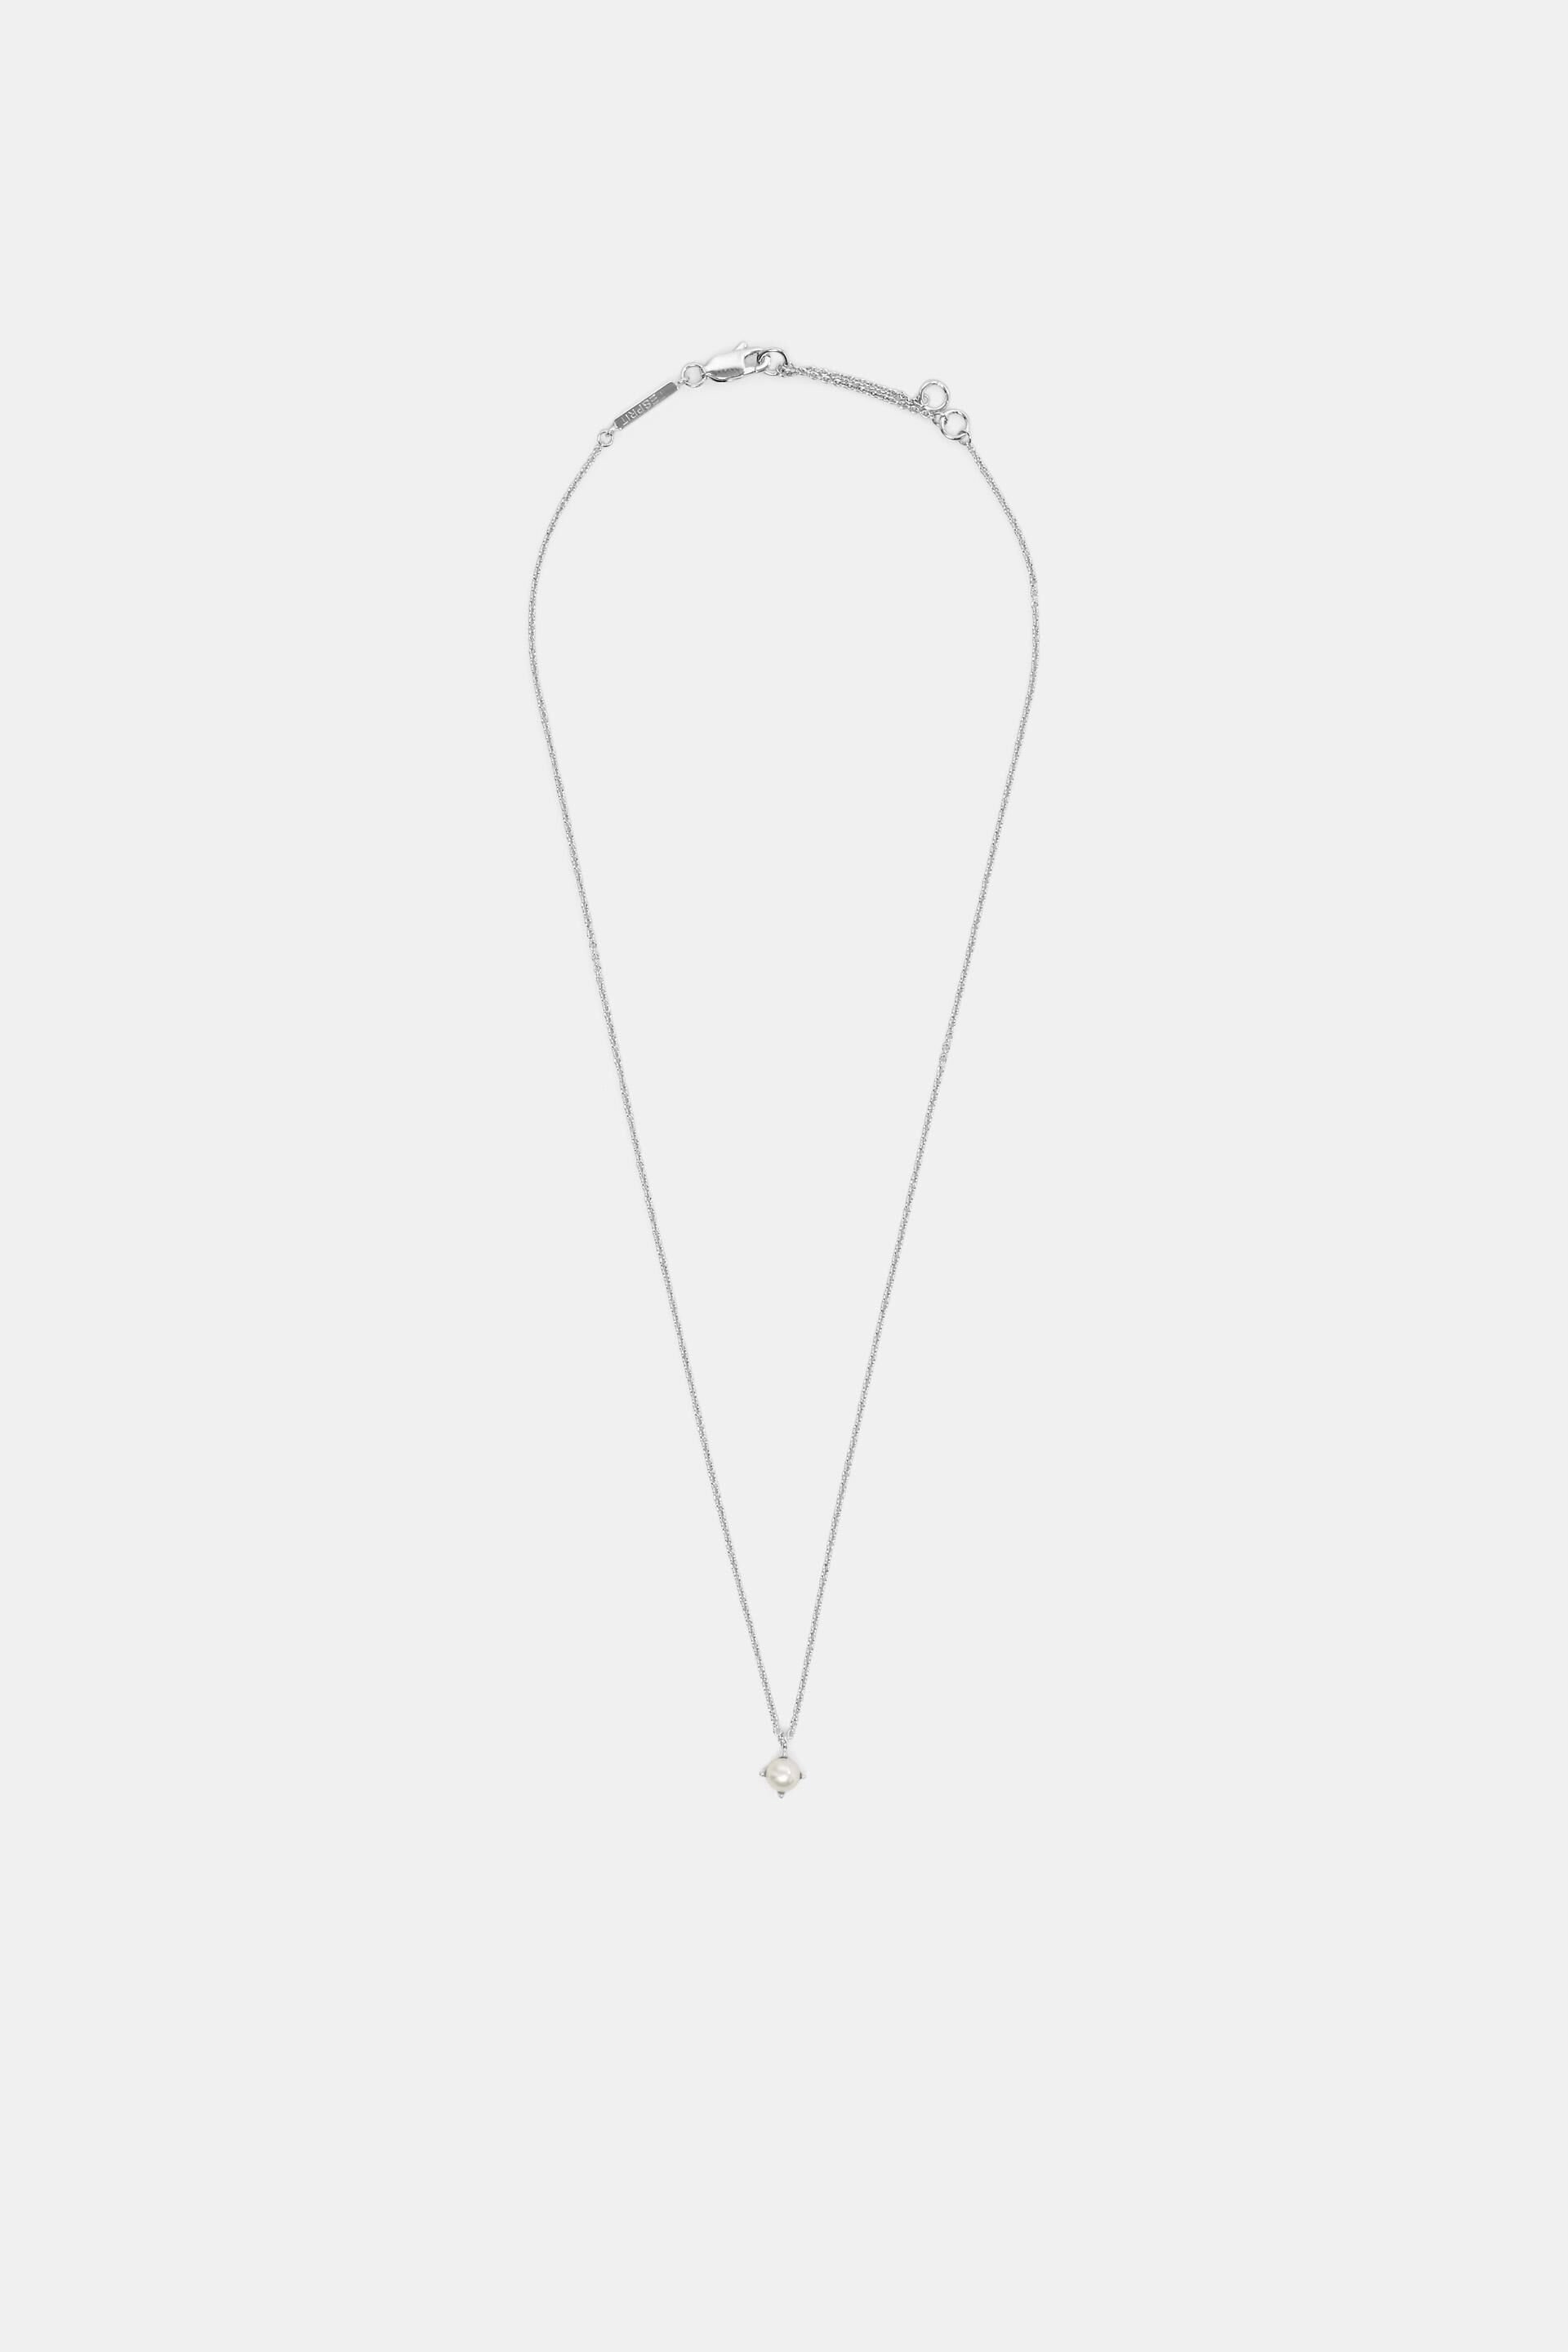 Dainty Sterling Silver Pendant Necklace